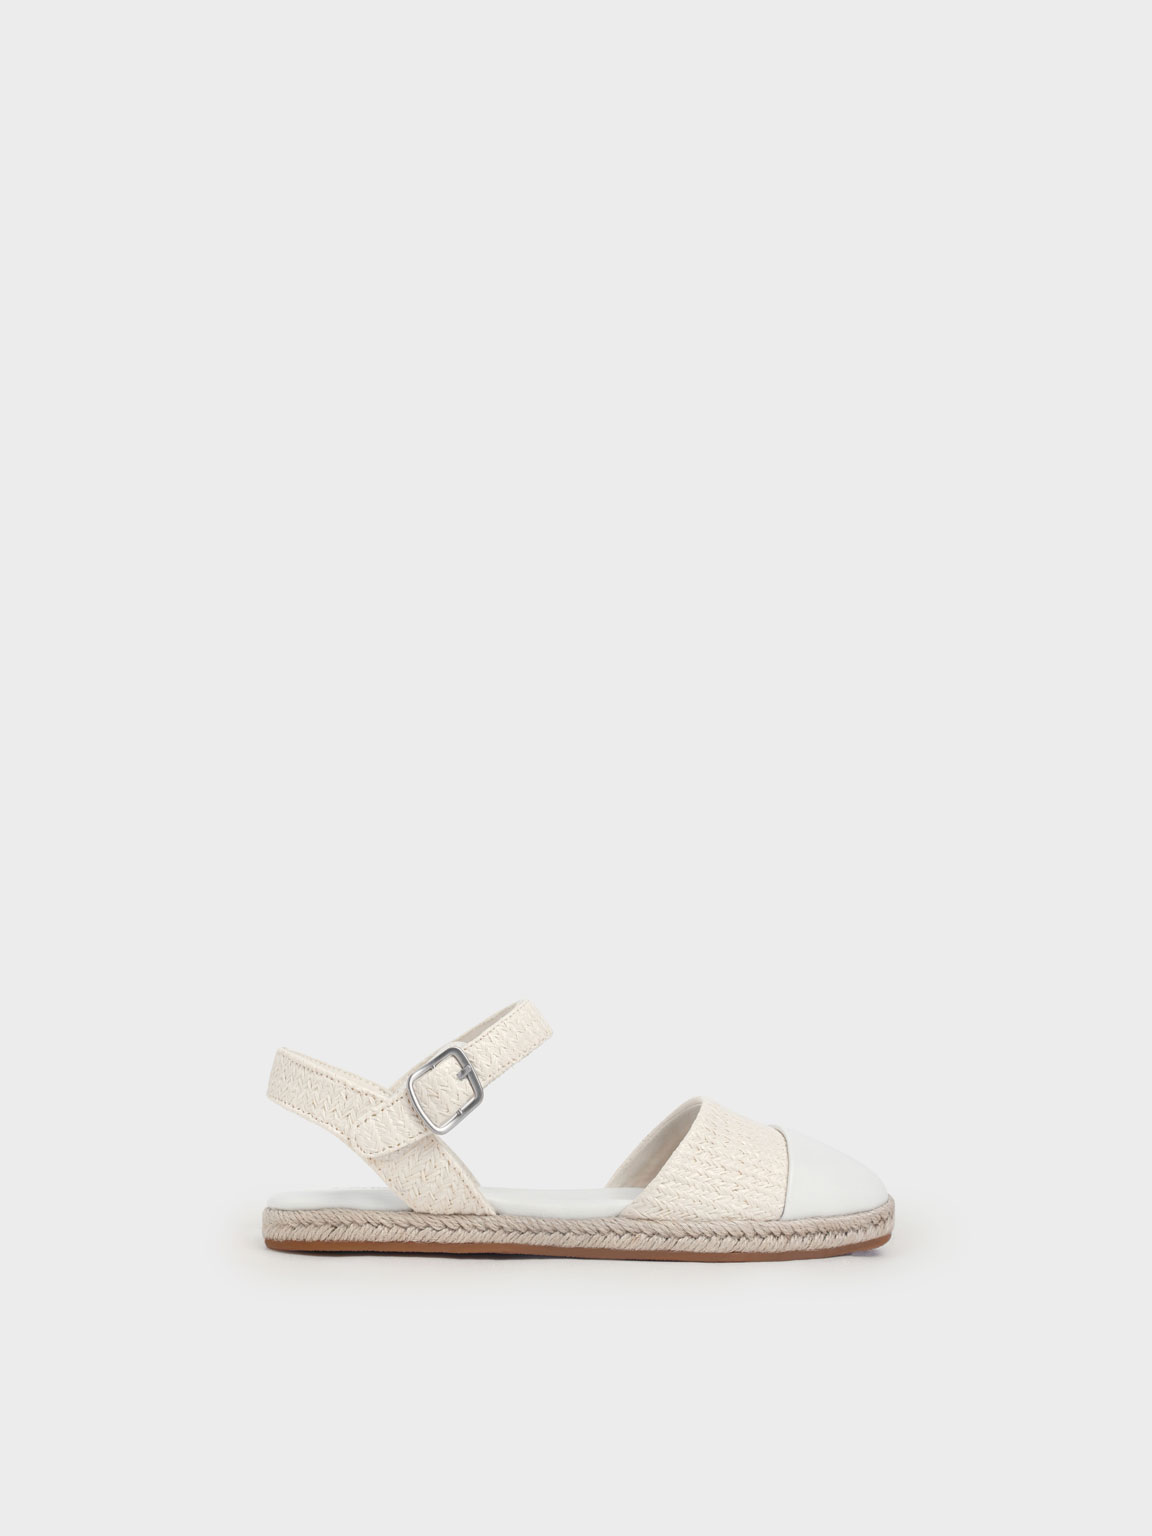 Girls’ Two-Tone Ankle-Strap Espadrilles